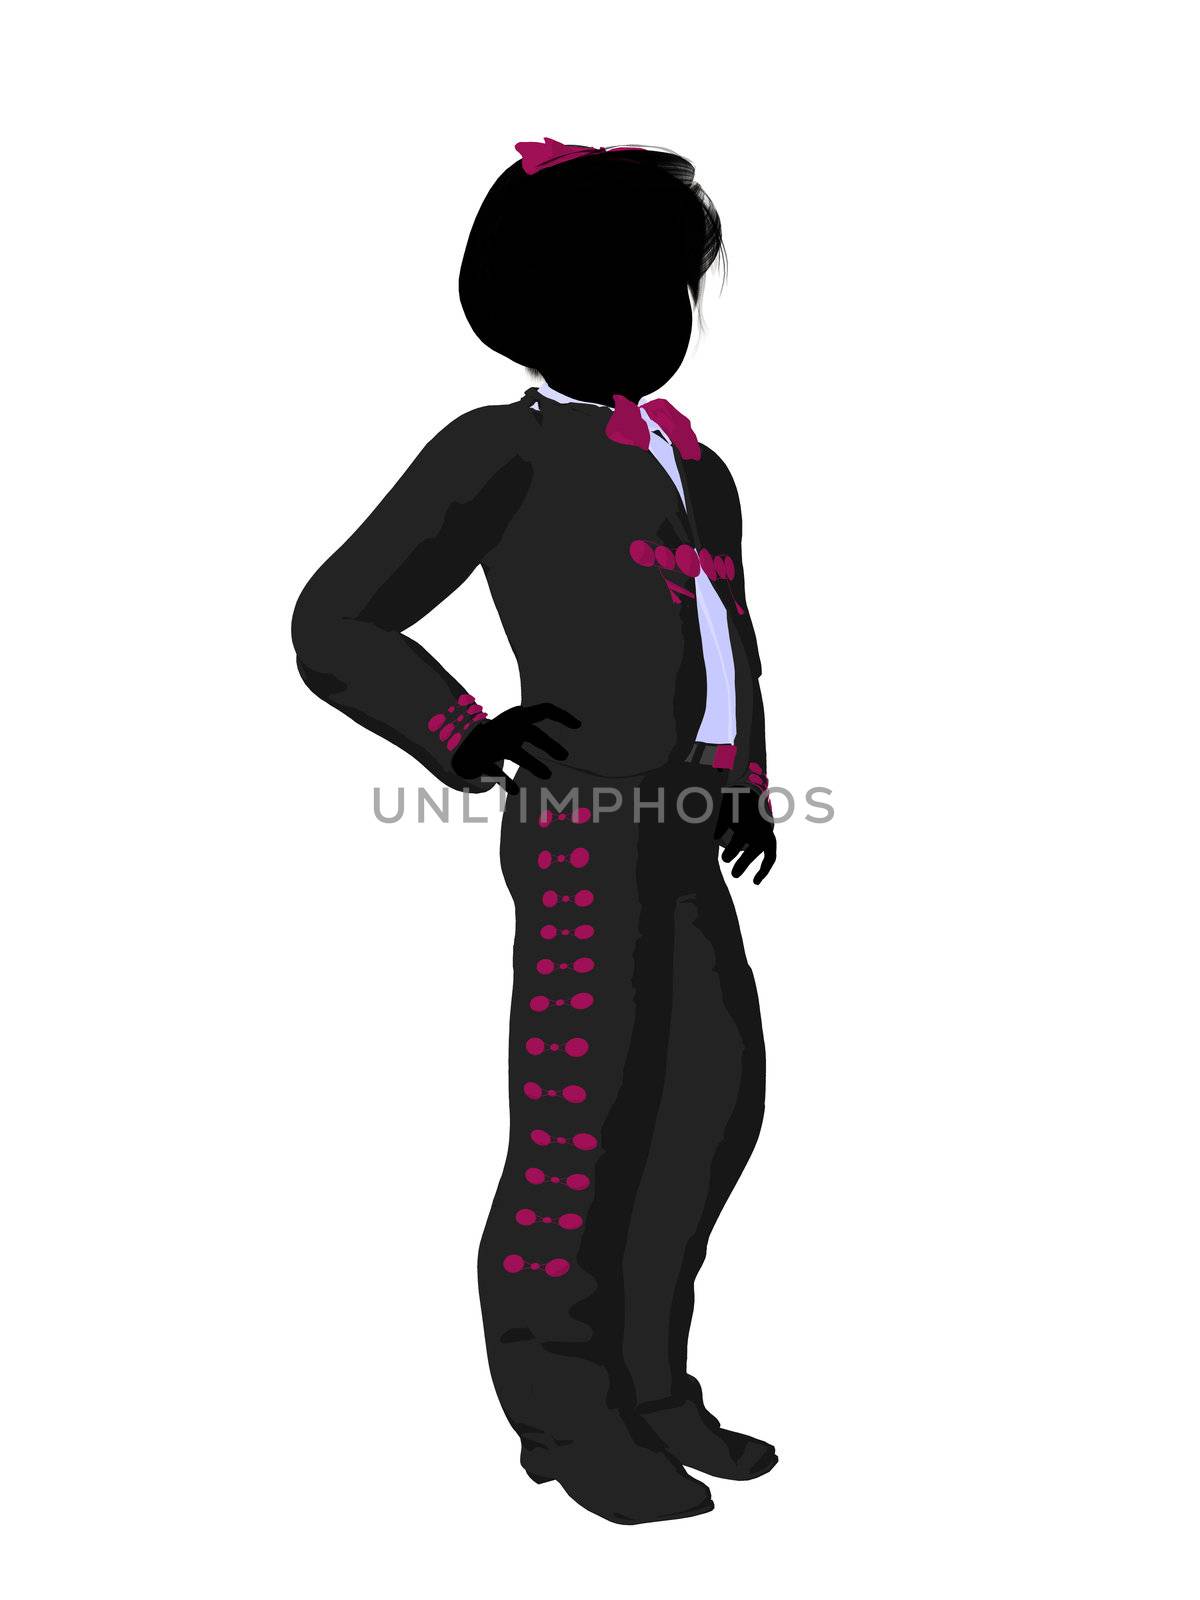 Girl Mariachi Silhouette Illustration by kathygold